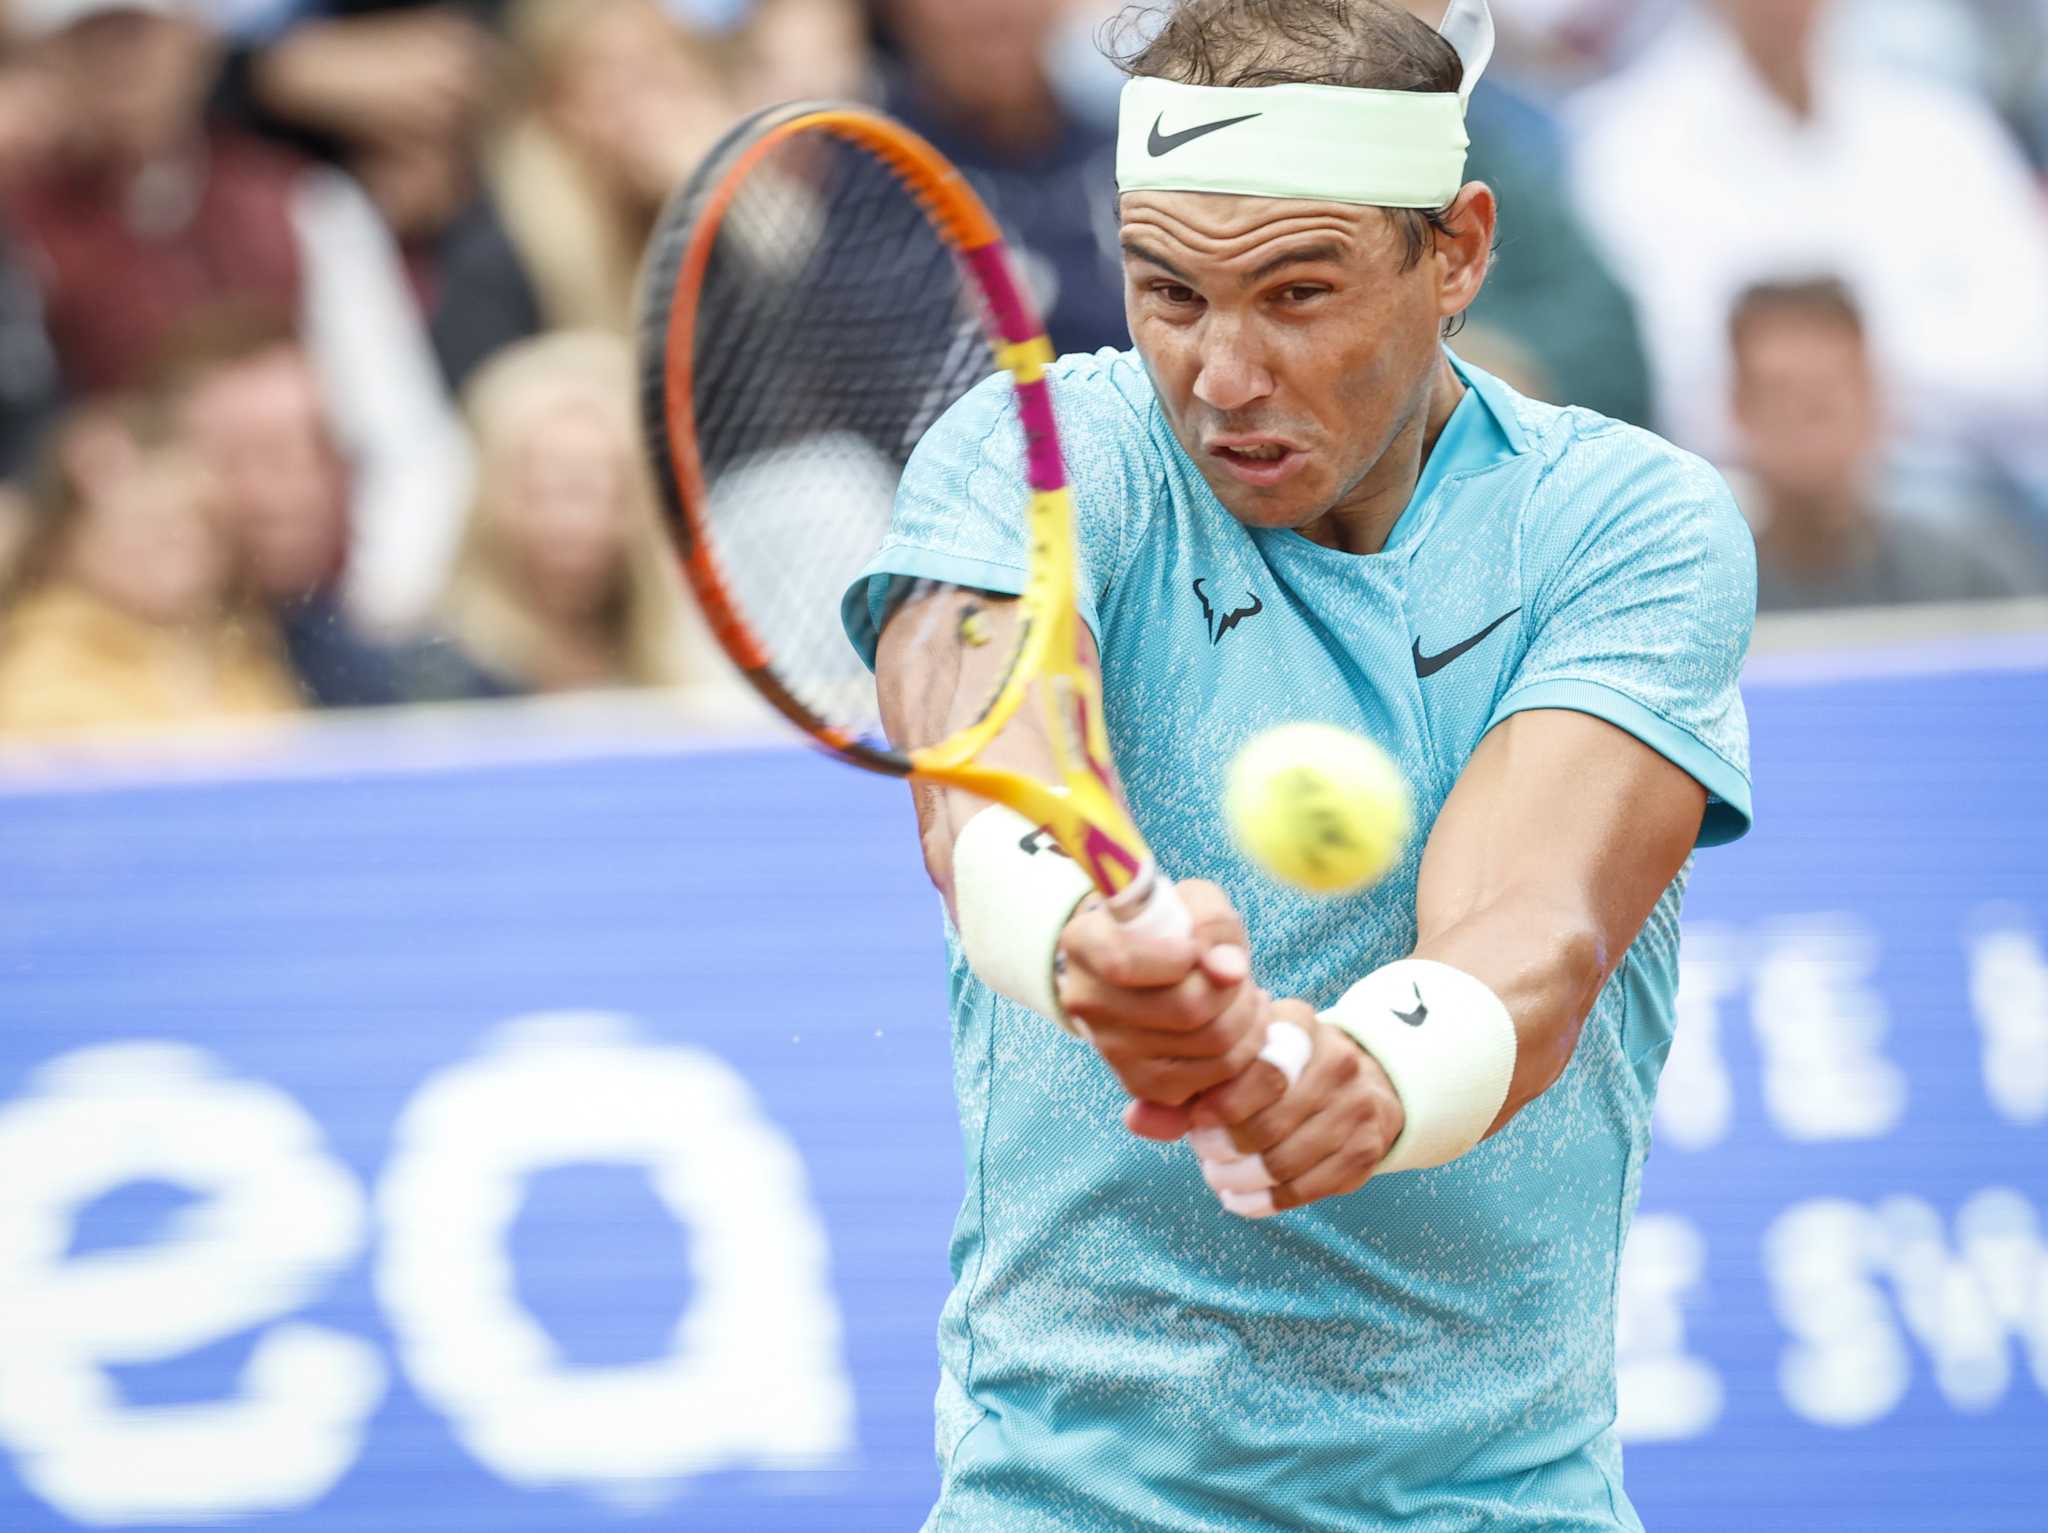 Rafael Nadal is on the US Open entry list, although that doesn't mean he will play there